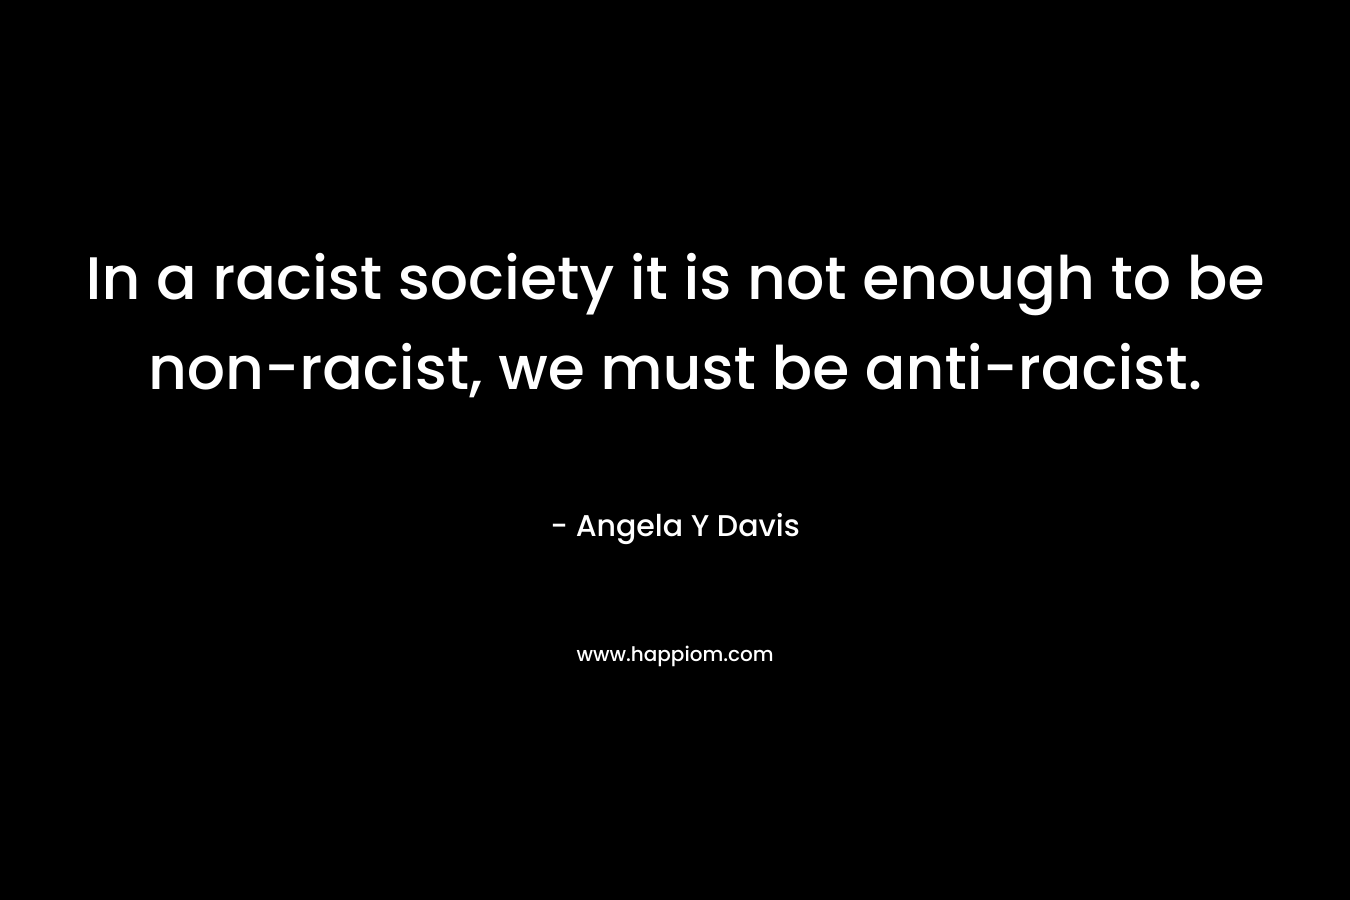 In a racist society it is not enough to be non-racist, we must be anti-racist. – Angela Y Davis